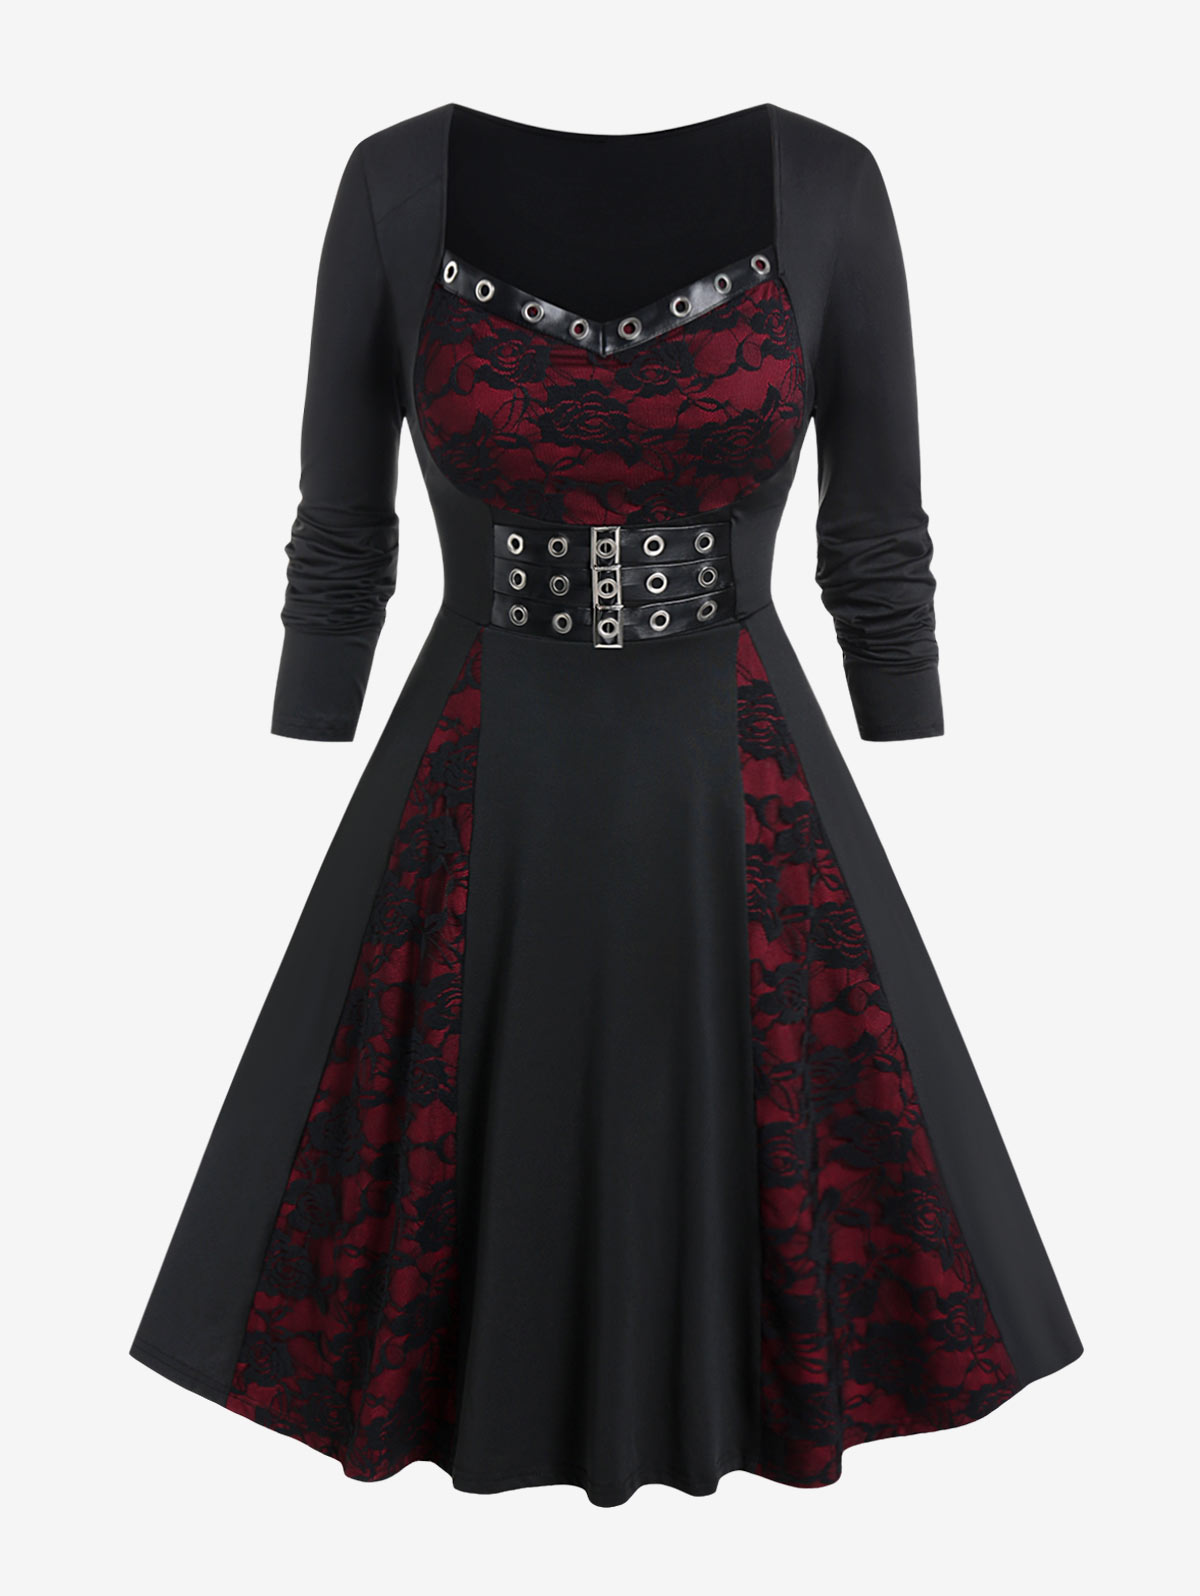 ROSEGAL Gothic Dresses Black High Waist Long Sleeves Vestidos 4XL Buckled Grommets Lace Panel A-Line Dress For Women Fall Winter